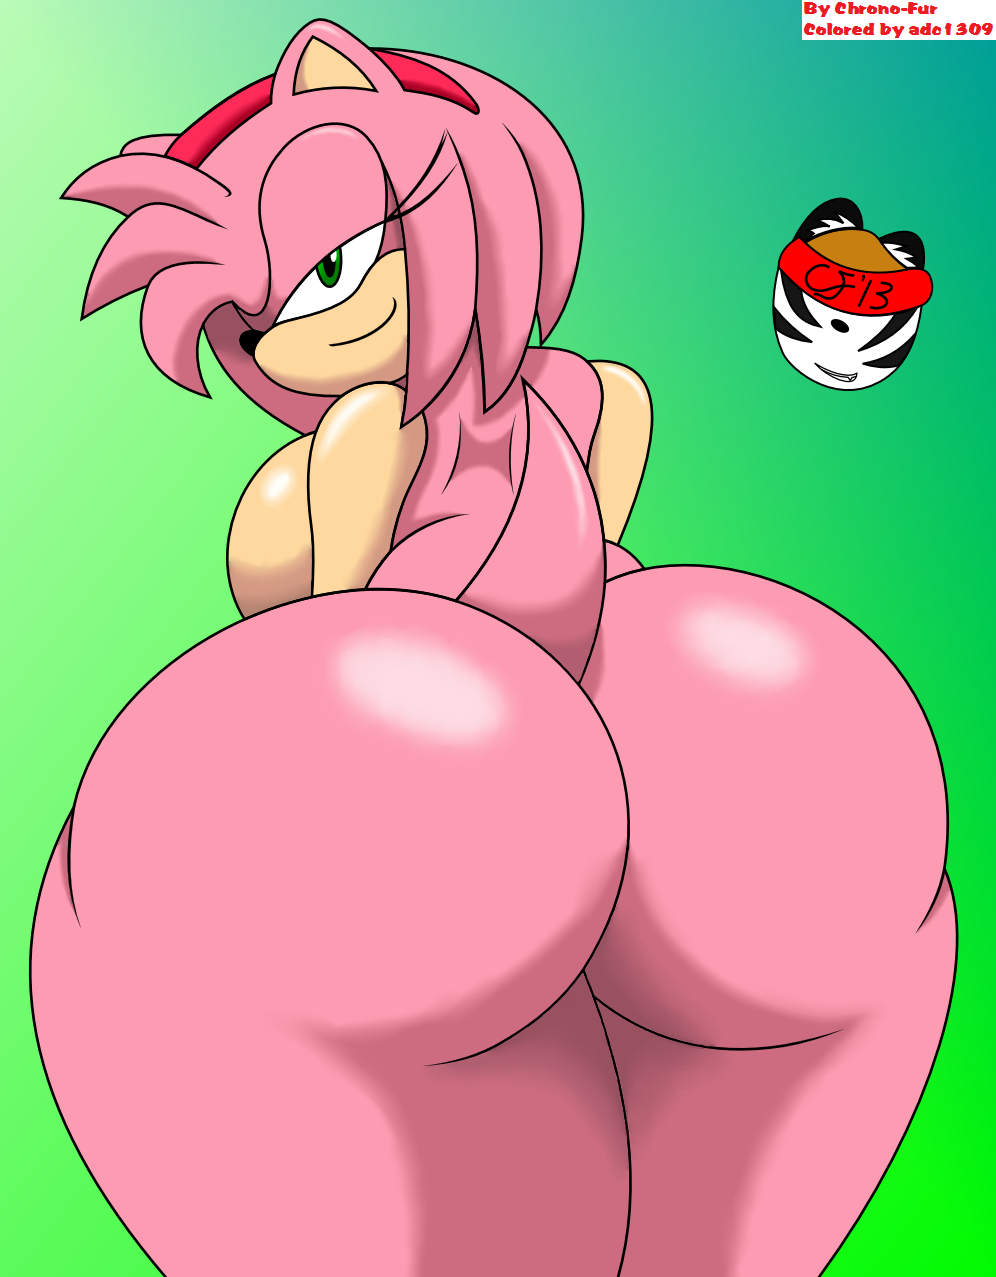 Trouble reccomend fat naked big breasted amy the hedgehog